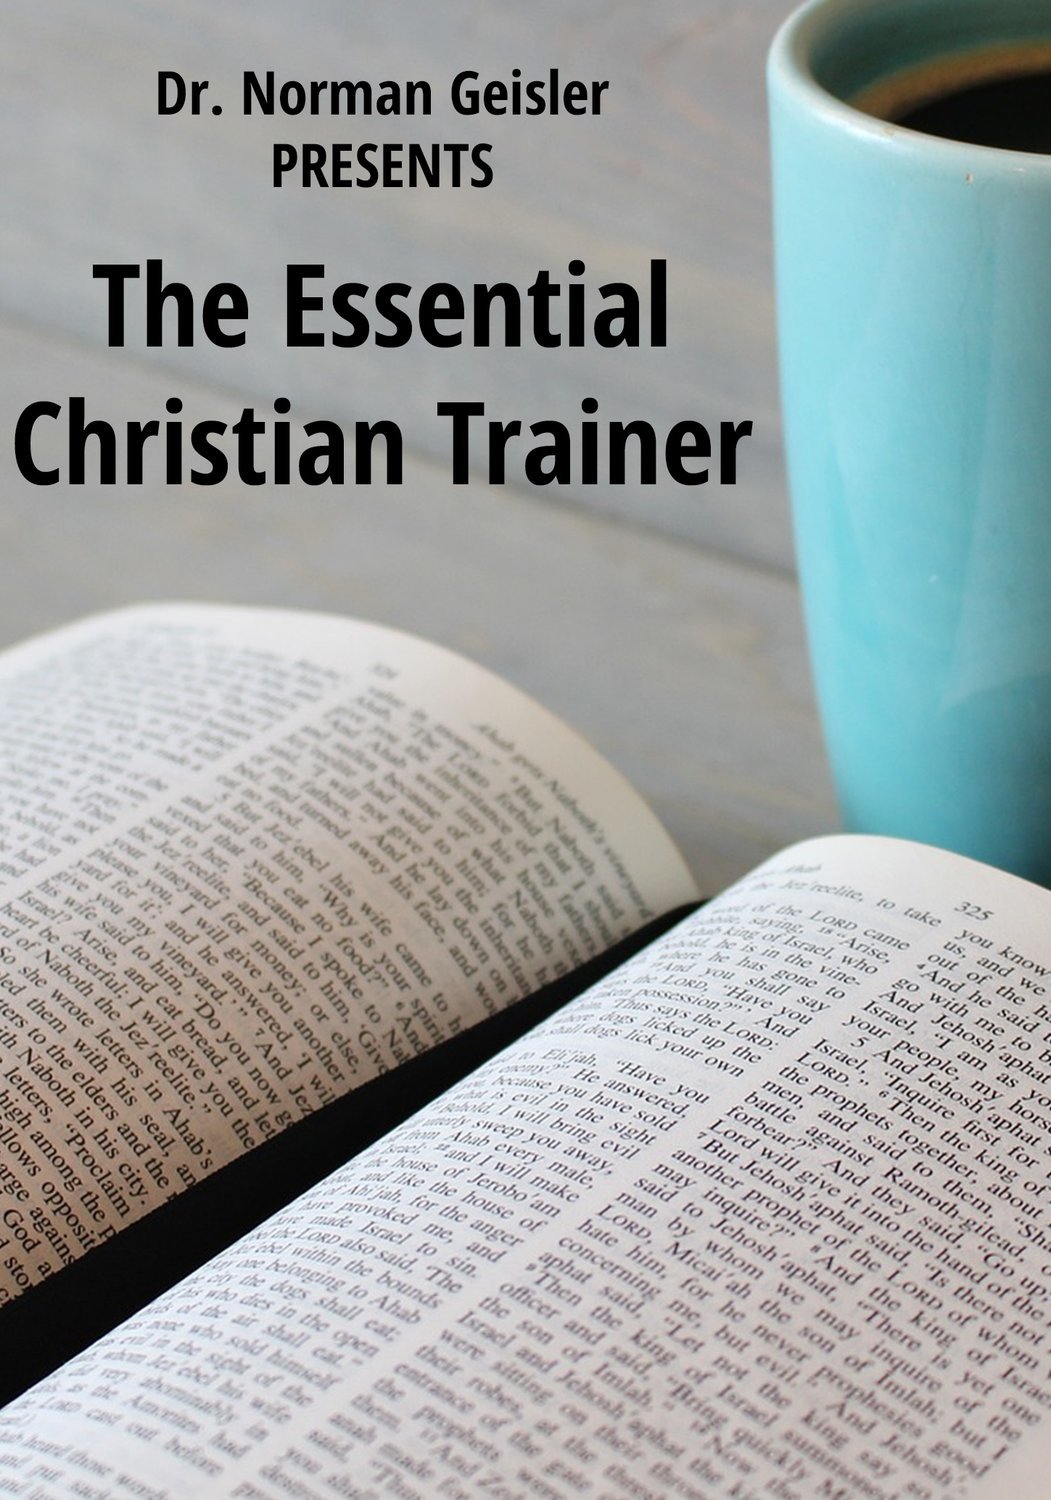 Essential Christian Trainer by Dr. Norman Geisler - DVDs